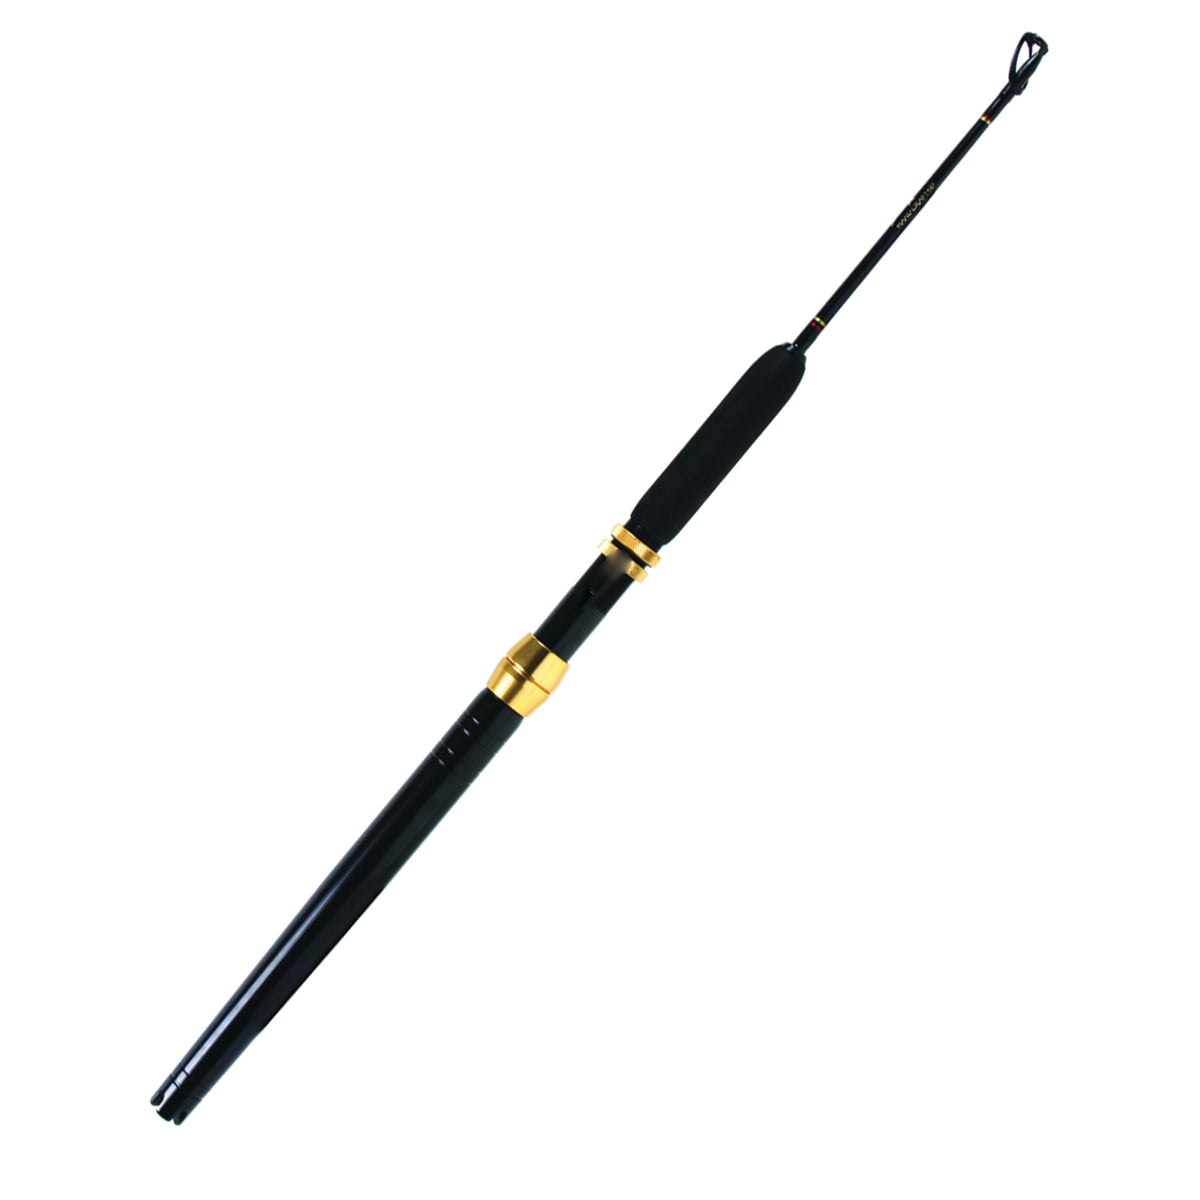 Star Handcrafted Kite Rod